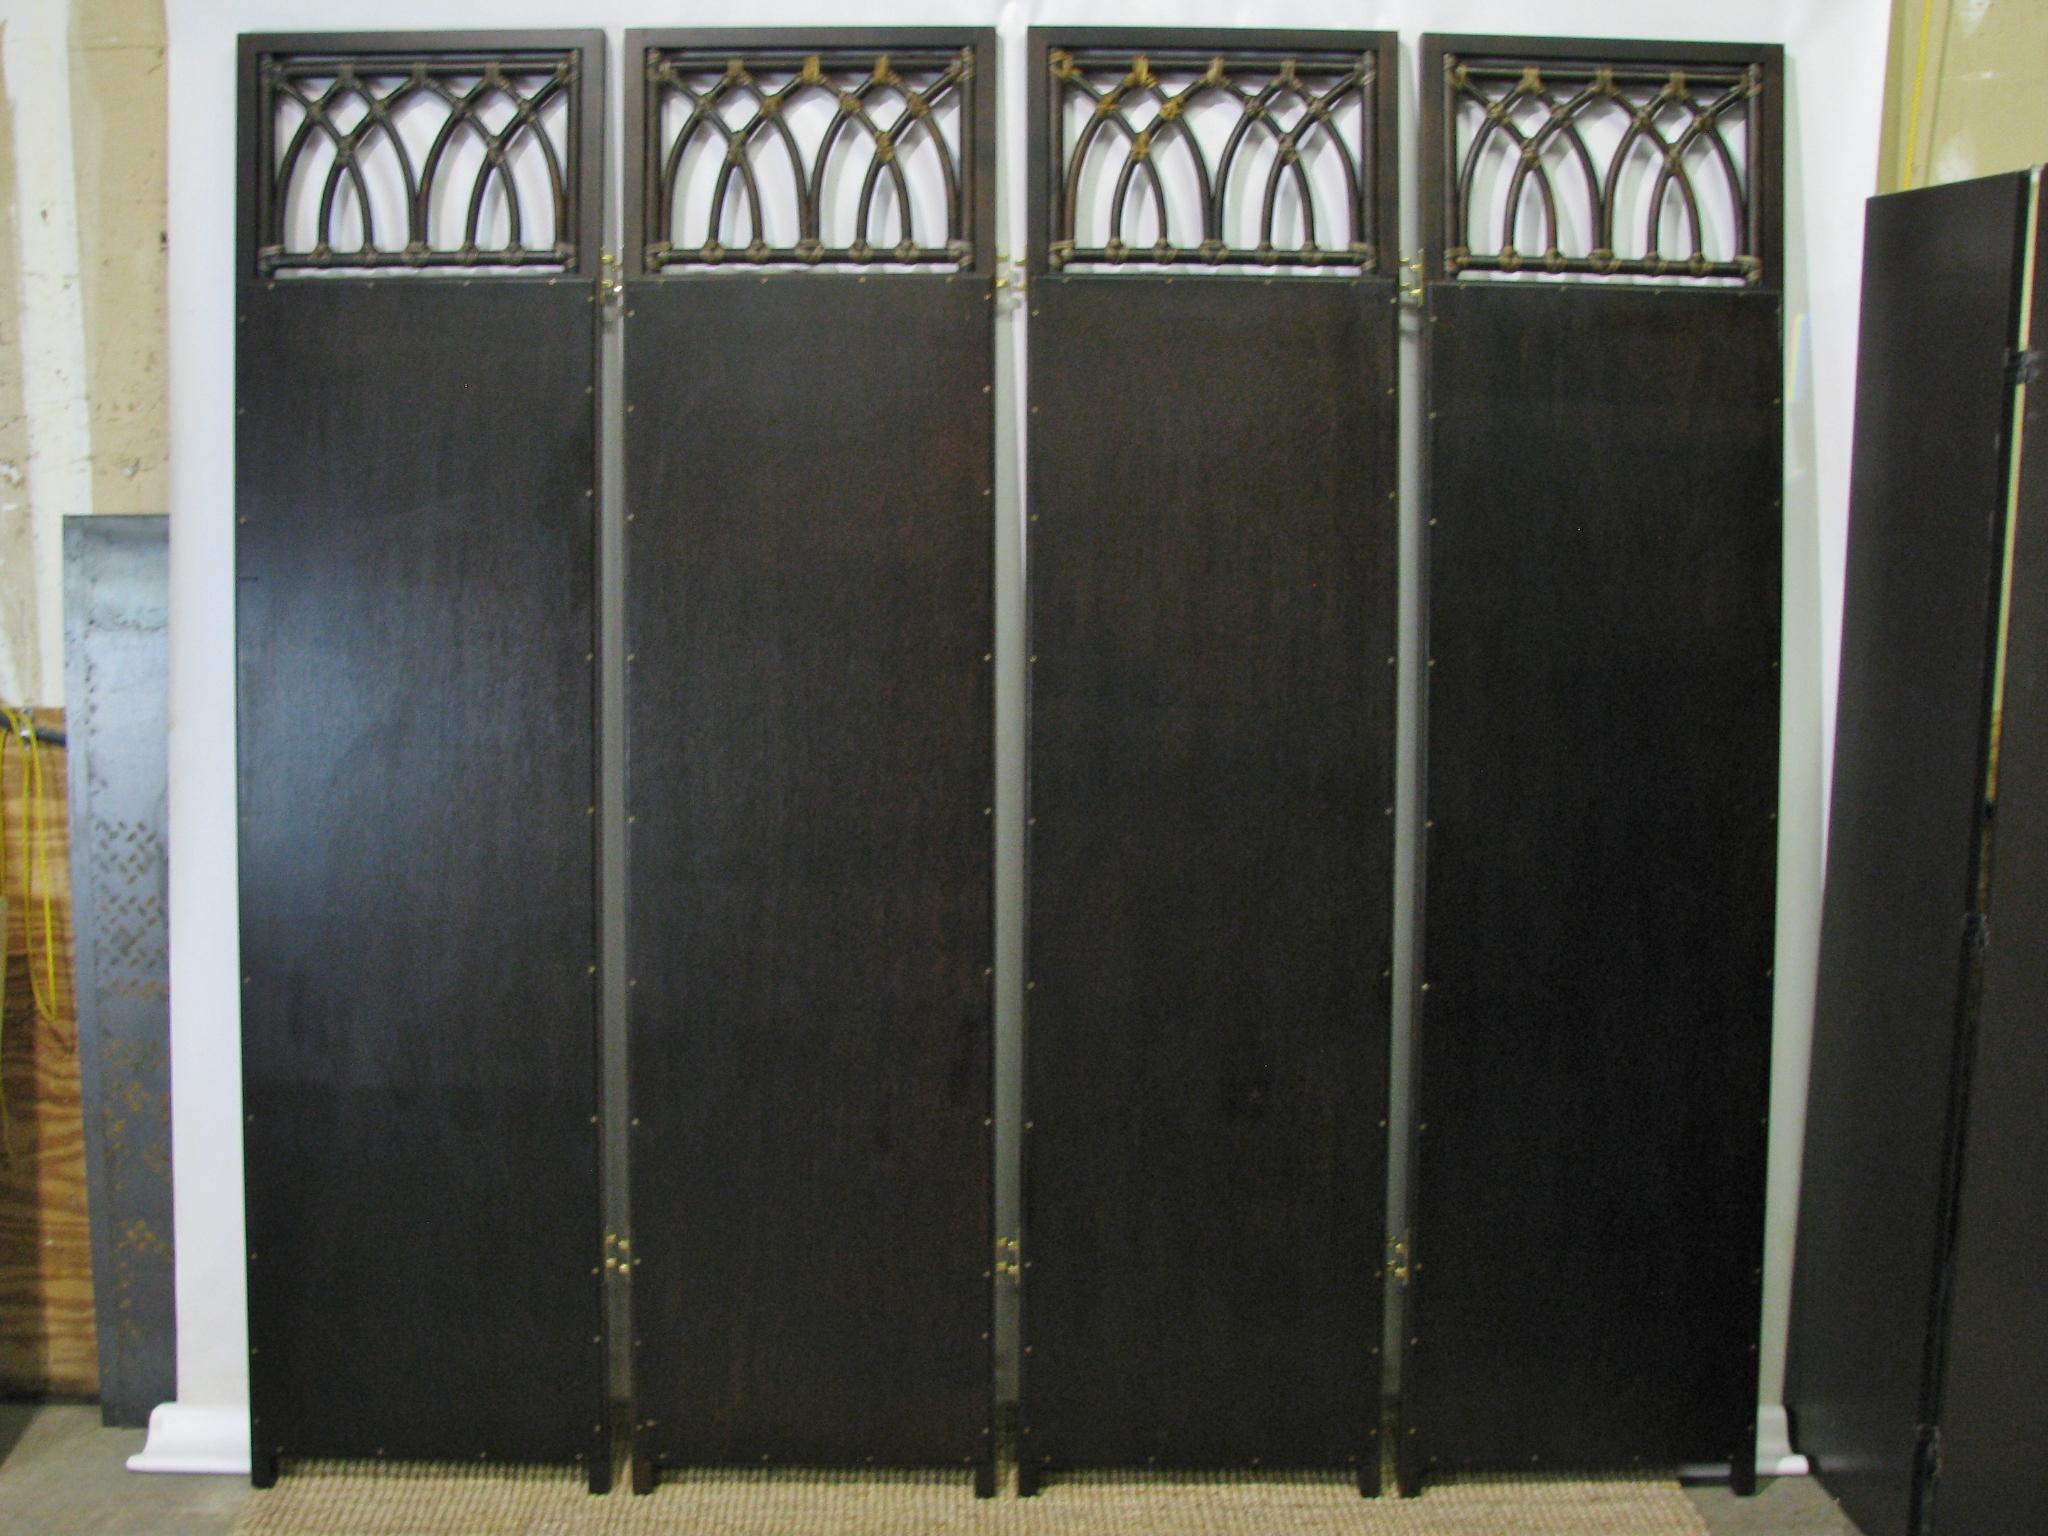 Beautifully designed and crafted vintage four-panel screen or room divider by McGuire. Unique Gothic arch over mirror design on the upper and lower sections. The arches are bound together by McGuire's signature leather strips. Extremely solid, and